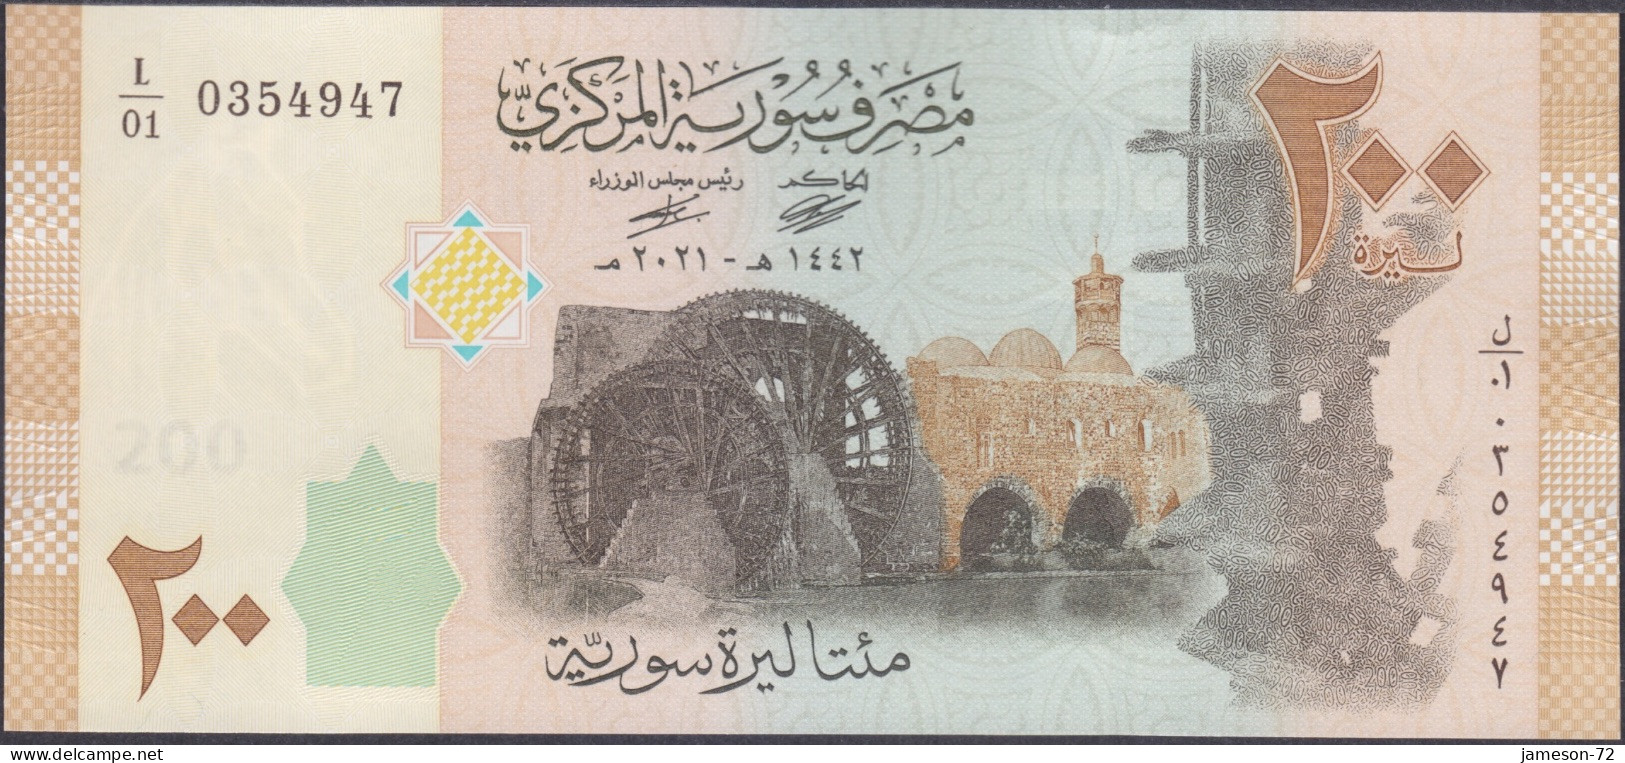 SYRIA - 200 Pounds AH1442 2021AD P# 114 Middle East Banknote - Edelweiss Coins - Syria